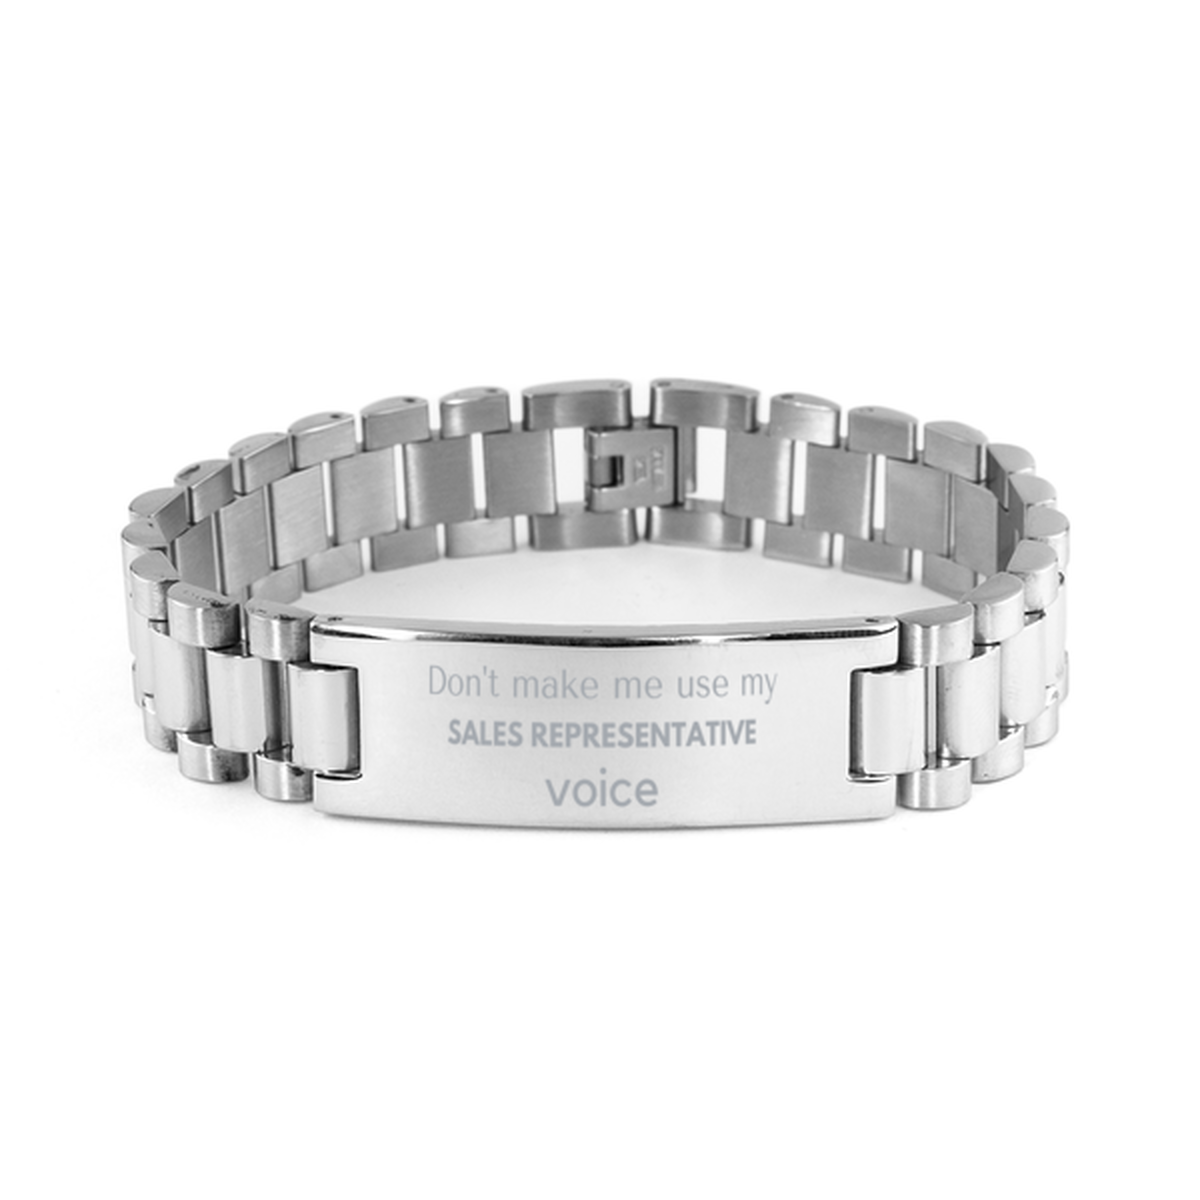 Don't make me use my Sales Representative voice, Sarcasm Sales Representative Gifts, Christmas Sales Representative Ladder Stainless Steel Bracelet Birthday Unique Gifts For Sales Representative Coworkers, Men, Women, Colleague, Friends